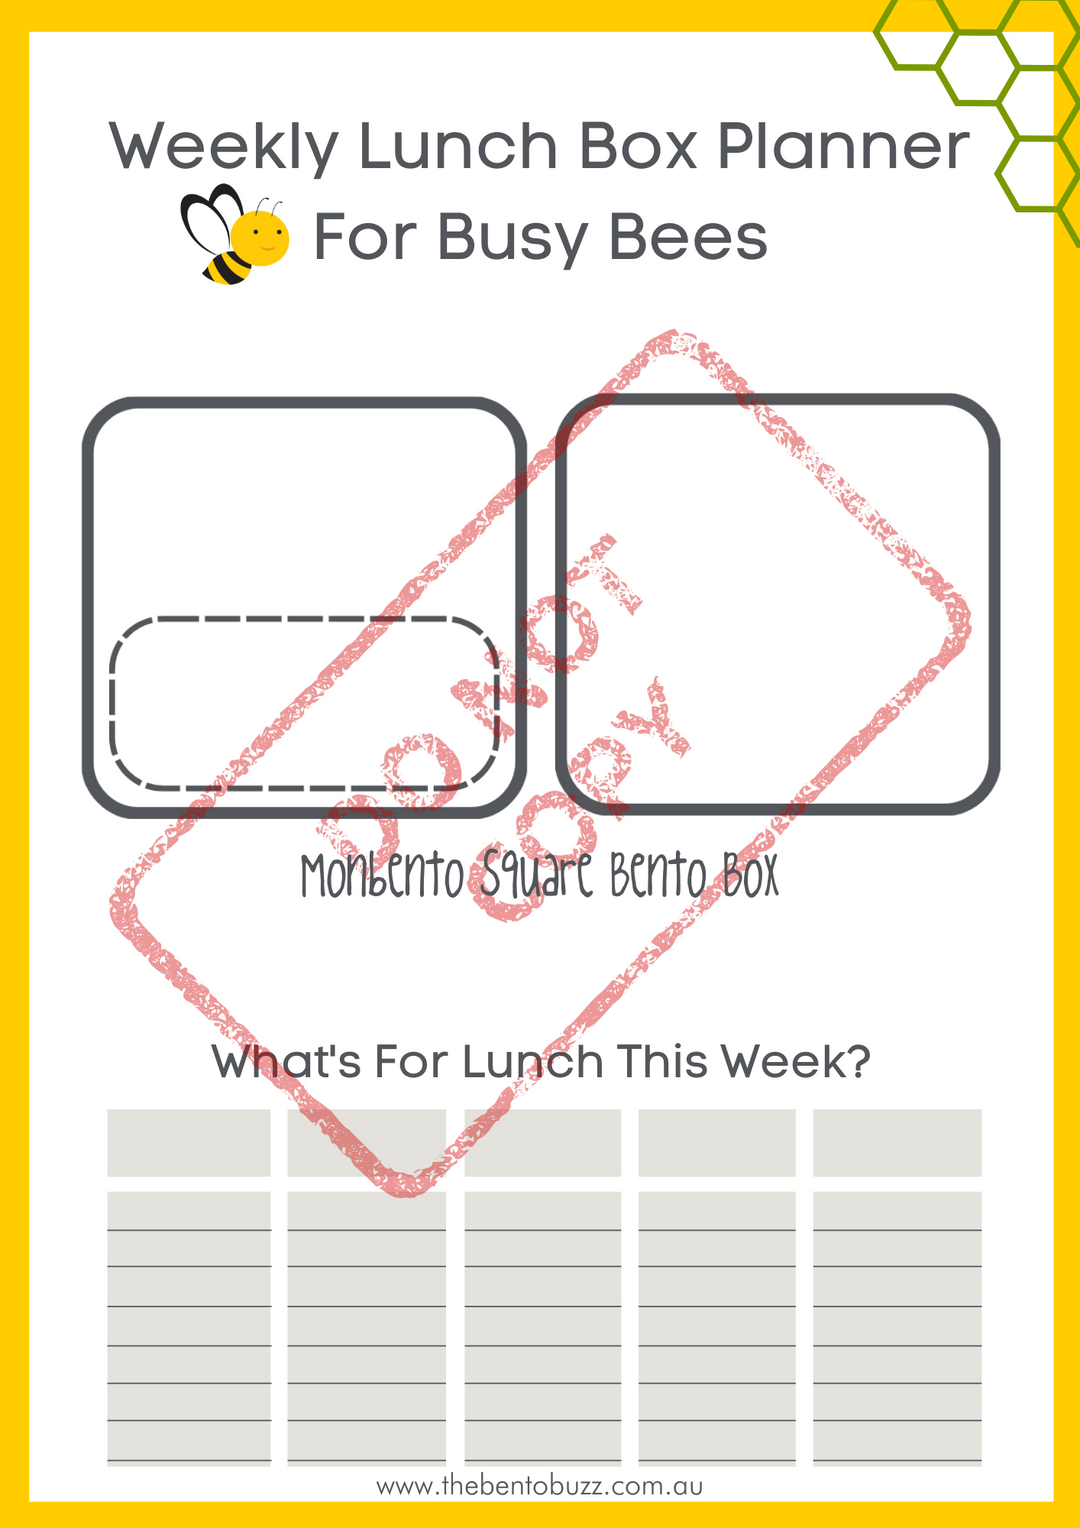 Download & Print Lunch Box Planner - Monbento Square